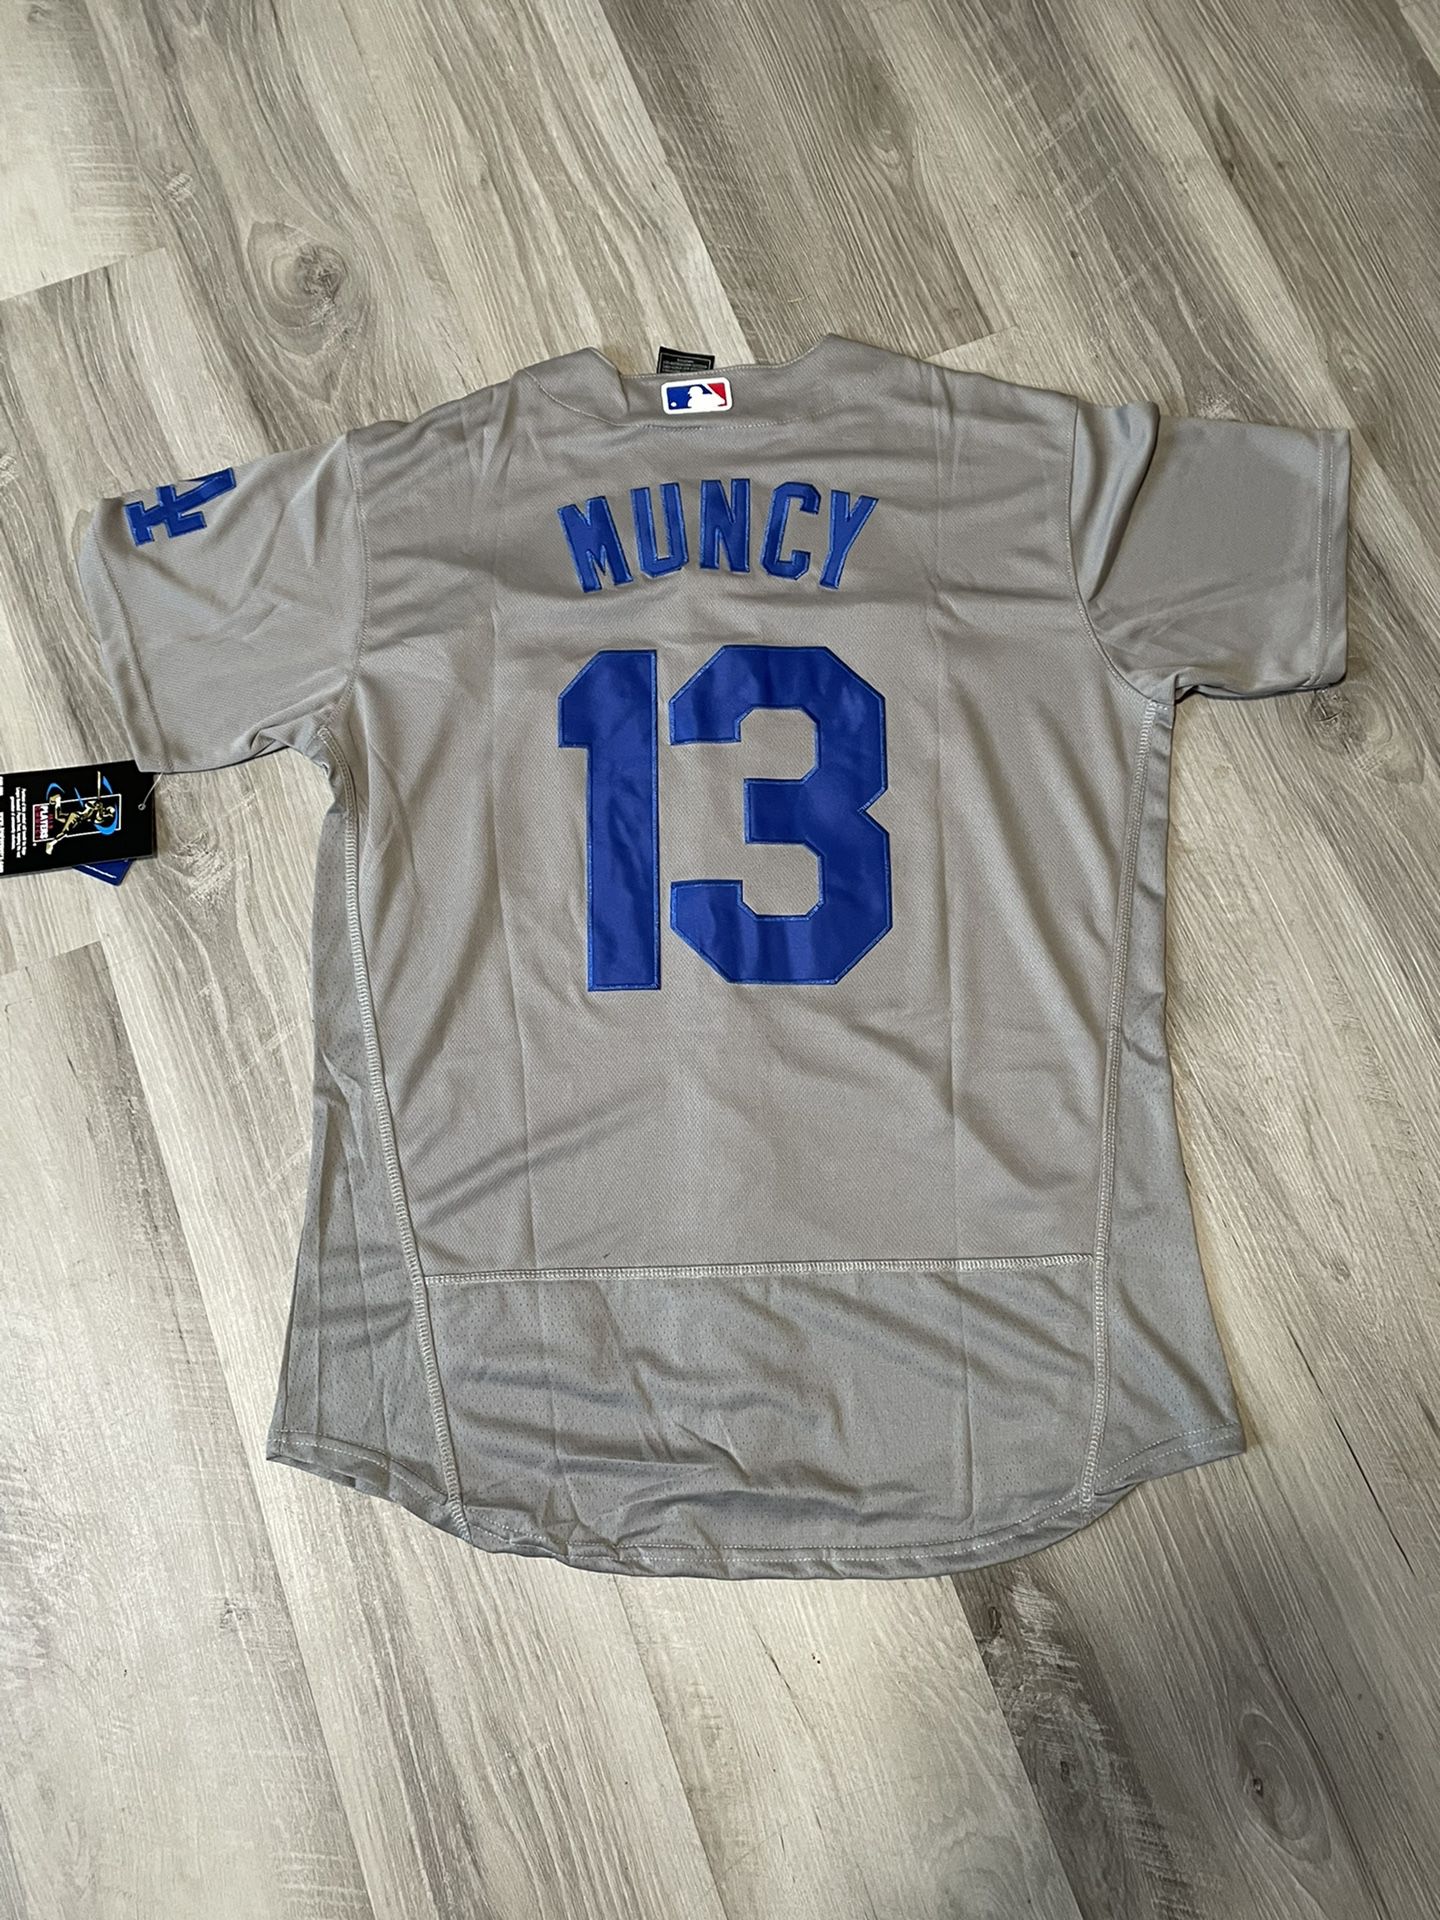 max muncy dodgers jersey for Sale in Moreno Valley, CA - OfferUp